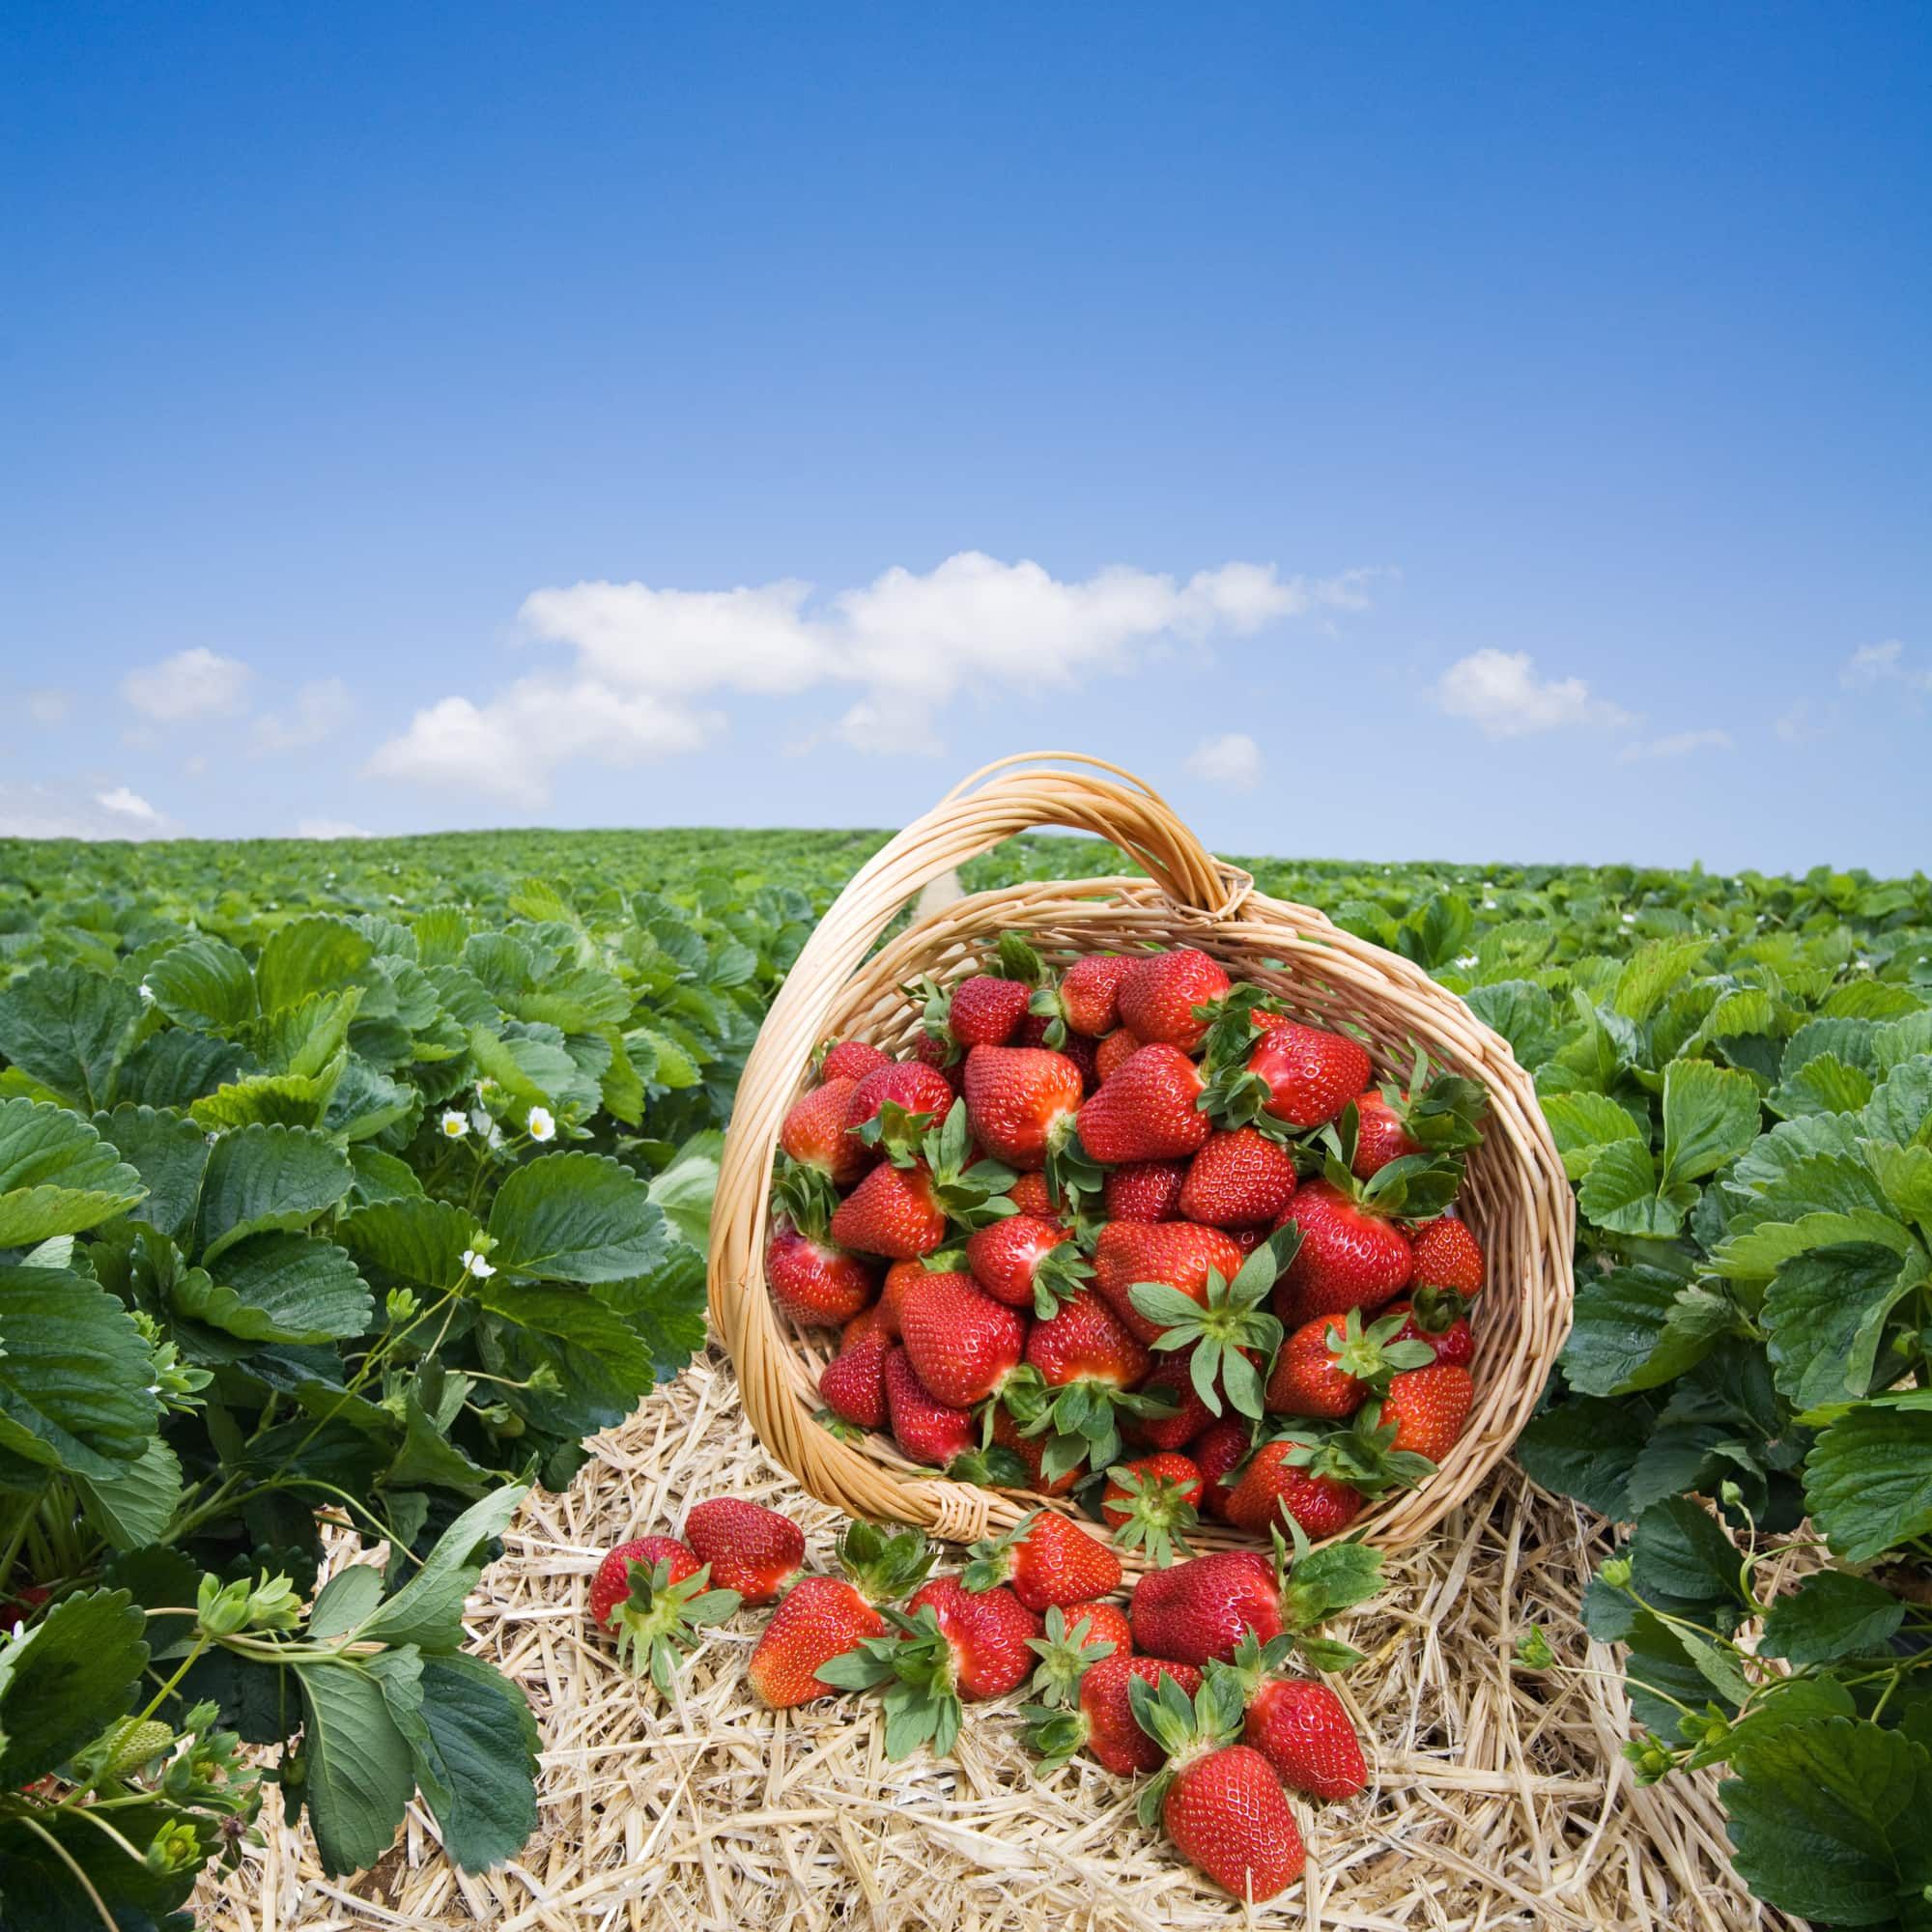 Strawberries in the basket on the green meadow and blye sky background with copy space.